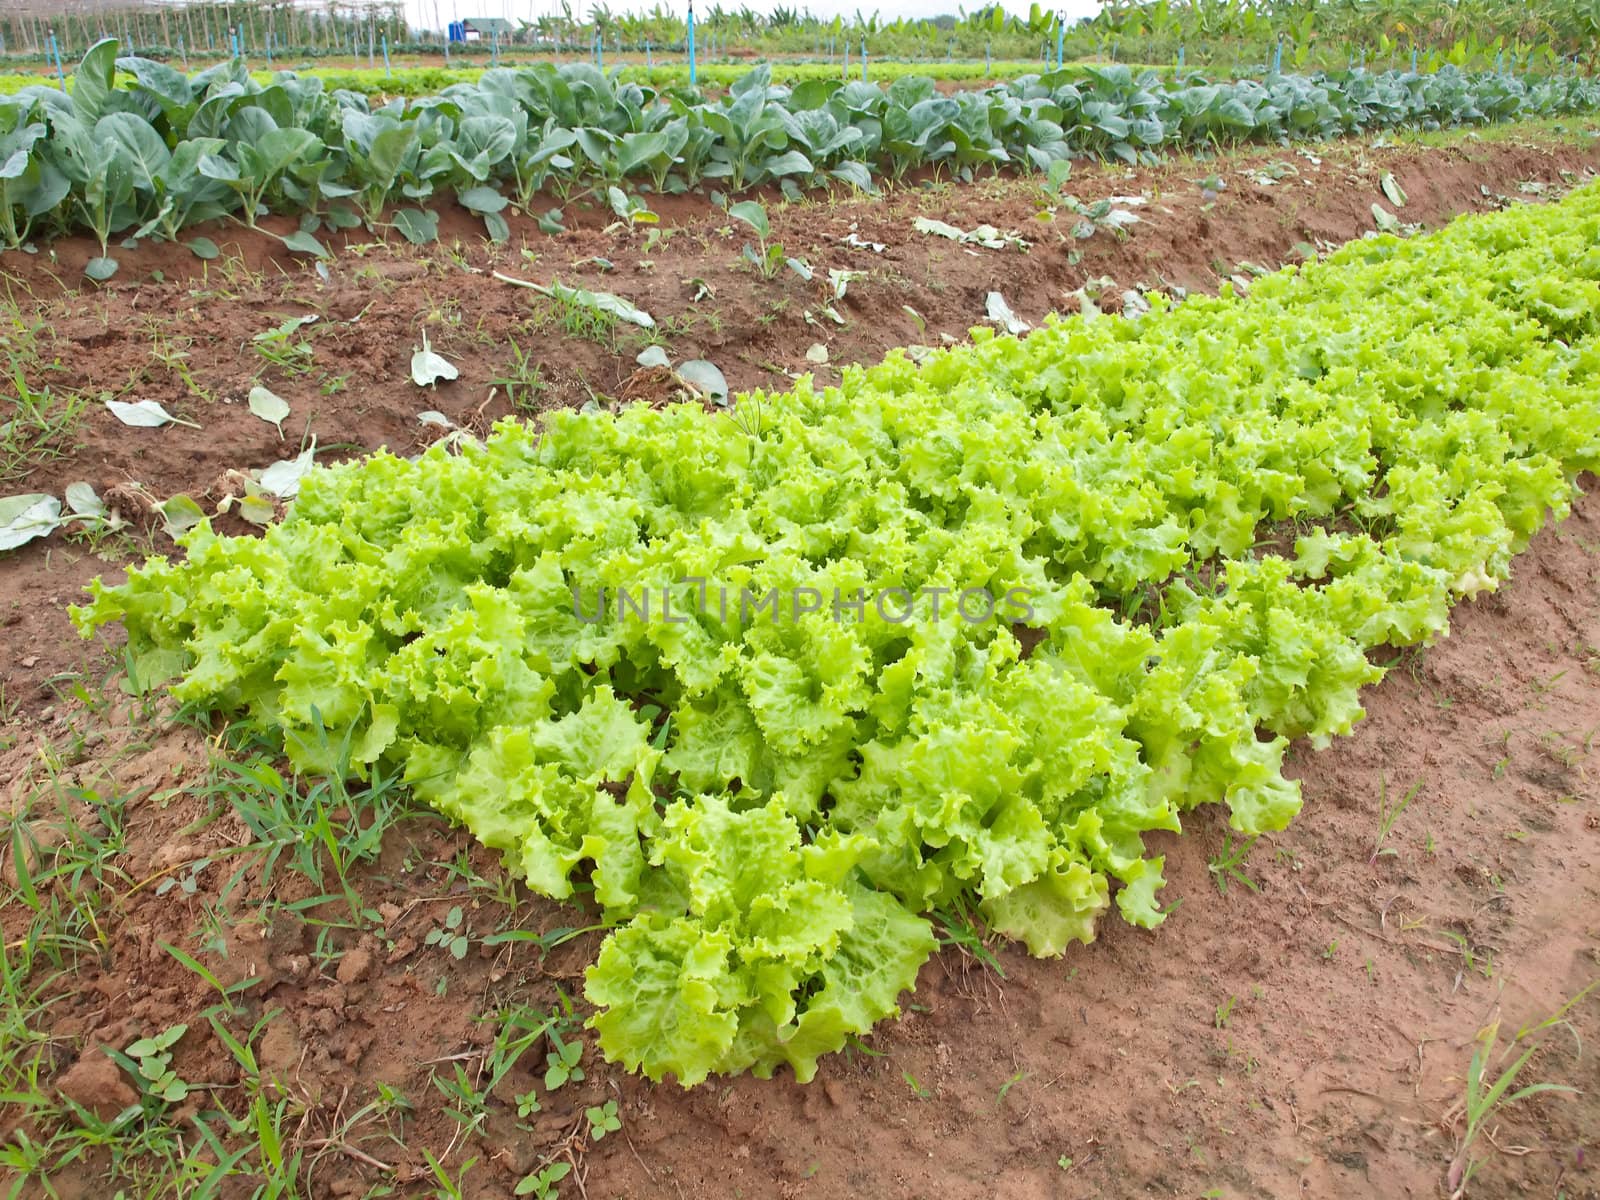 Field of green fresh lettuce and chinese kale vegetable growing at a farm